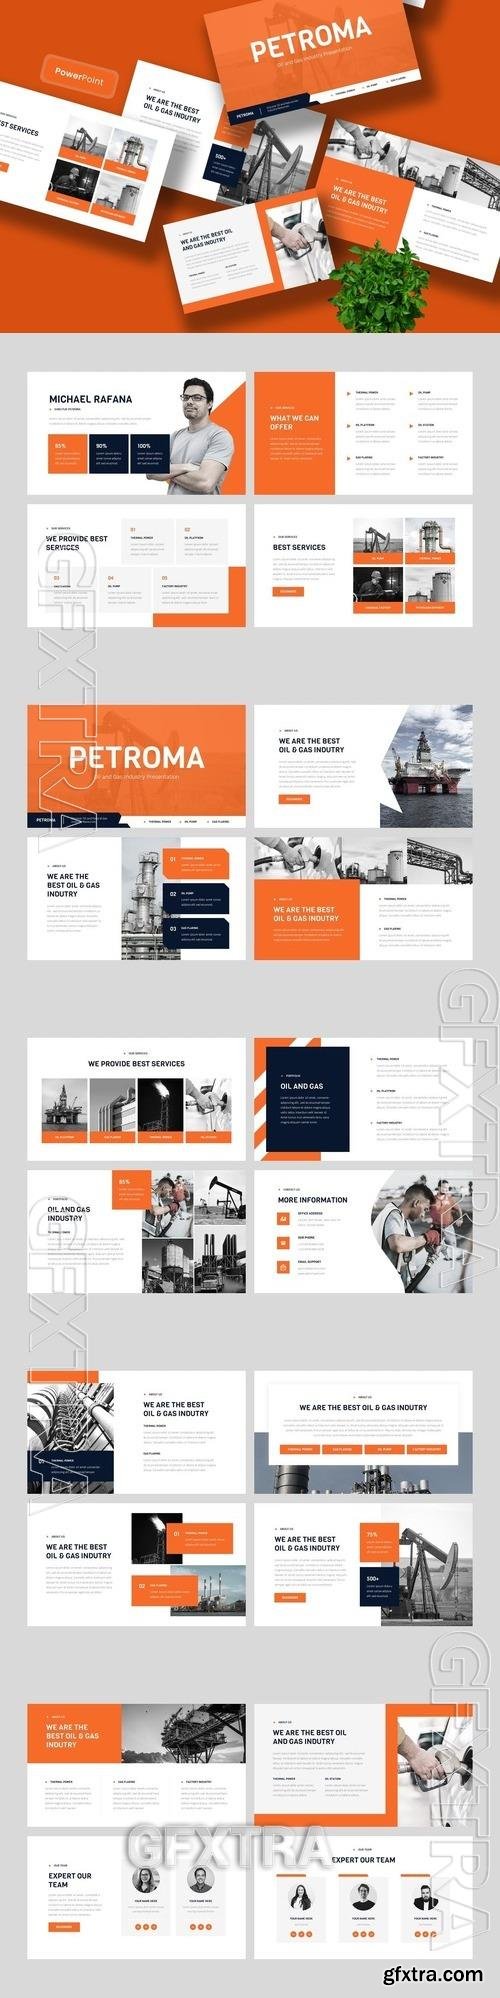 Petroma - Oil & Gas Industry PowerPoint Template D7FF3XQ